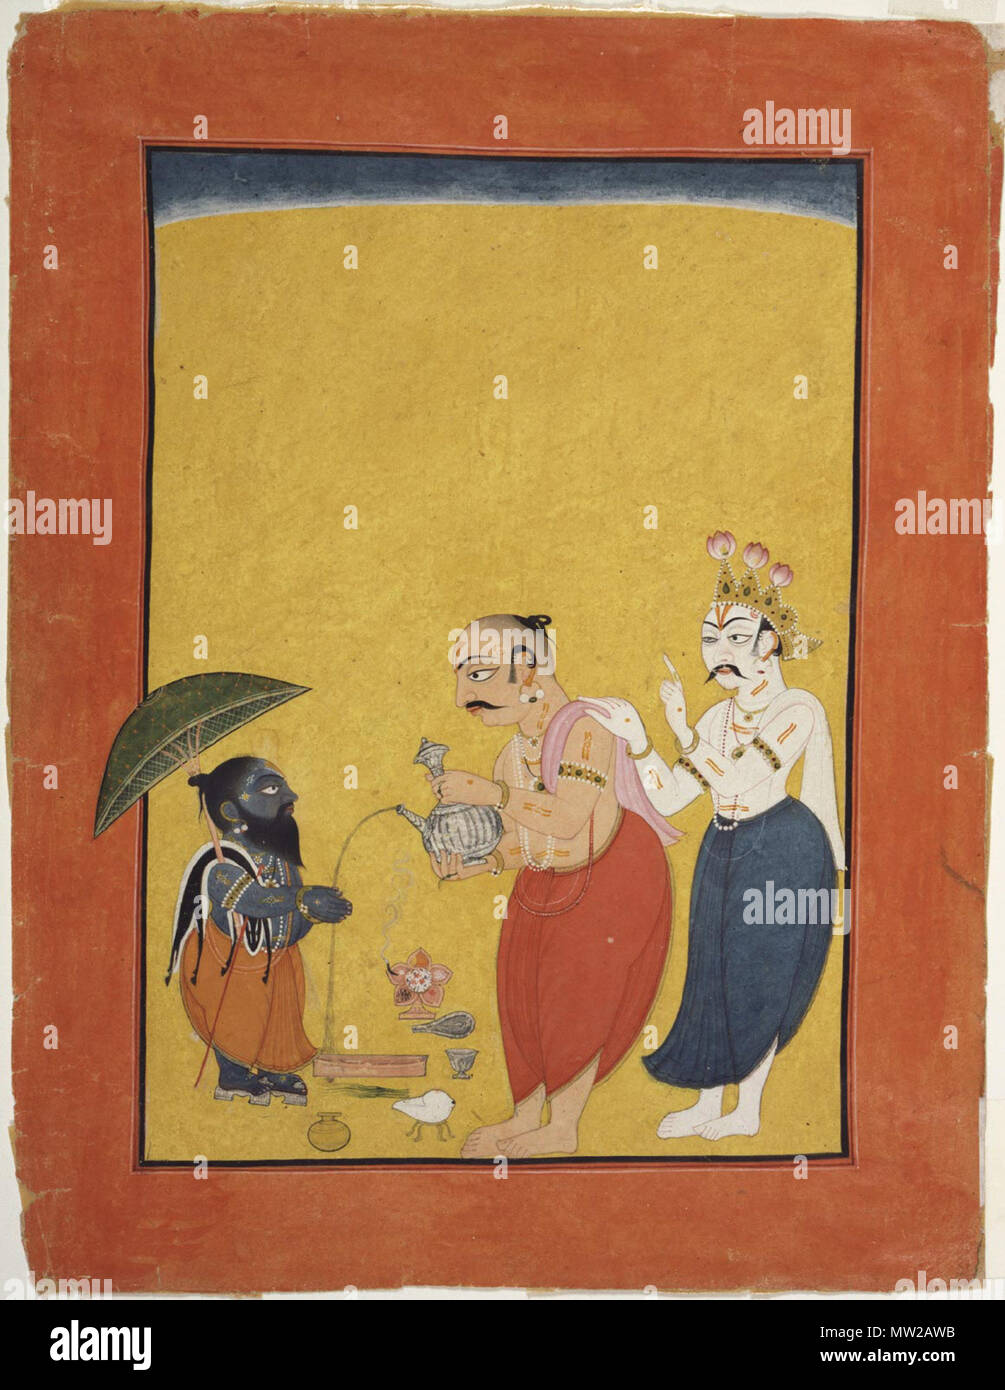 . English: 'Vamana, the Dwarf Avatar of Vishnu Page from a dispersed series of the Bhagavata Purana (Story of the Lord Vishnu) Made in Mankot, Jammu and Kashmir, India c. 1700-25 Artist/maker unknown, India, Jammu and Kashmir, Mankot Opaque watercolor, gold, and silver-colored paint on paper 11 5/16 x 8 13/16 inches (28.7 x 22.4 cm) Currently not on view 2004-149-32 Alvin O. Bellak Collection, 2004 Label Through intensive religious rituals, the demon king Bali conquered the gods. The god Vishnu came to earth as Vamana, his fifth avatar, to defeat him. Vamana appeared as a dwarflike Brahmin. Wh Stock Photo